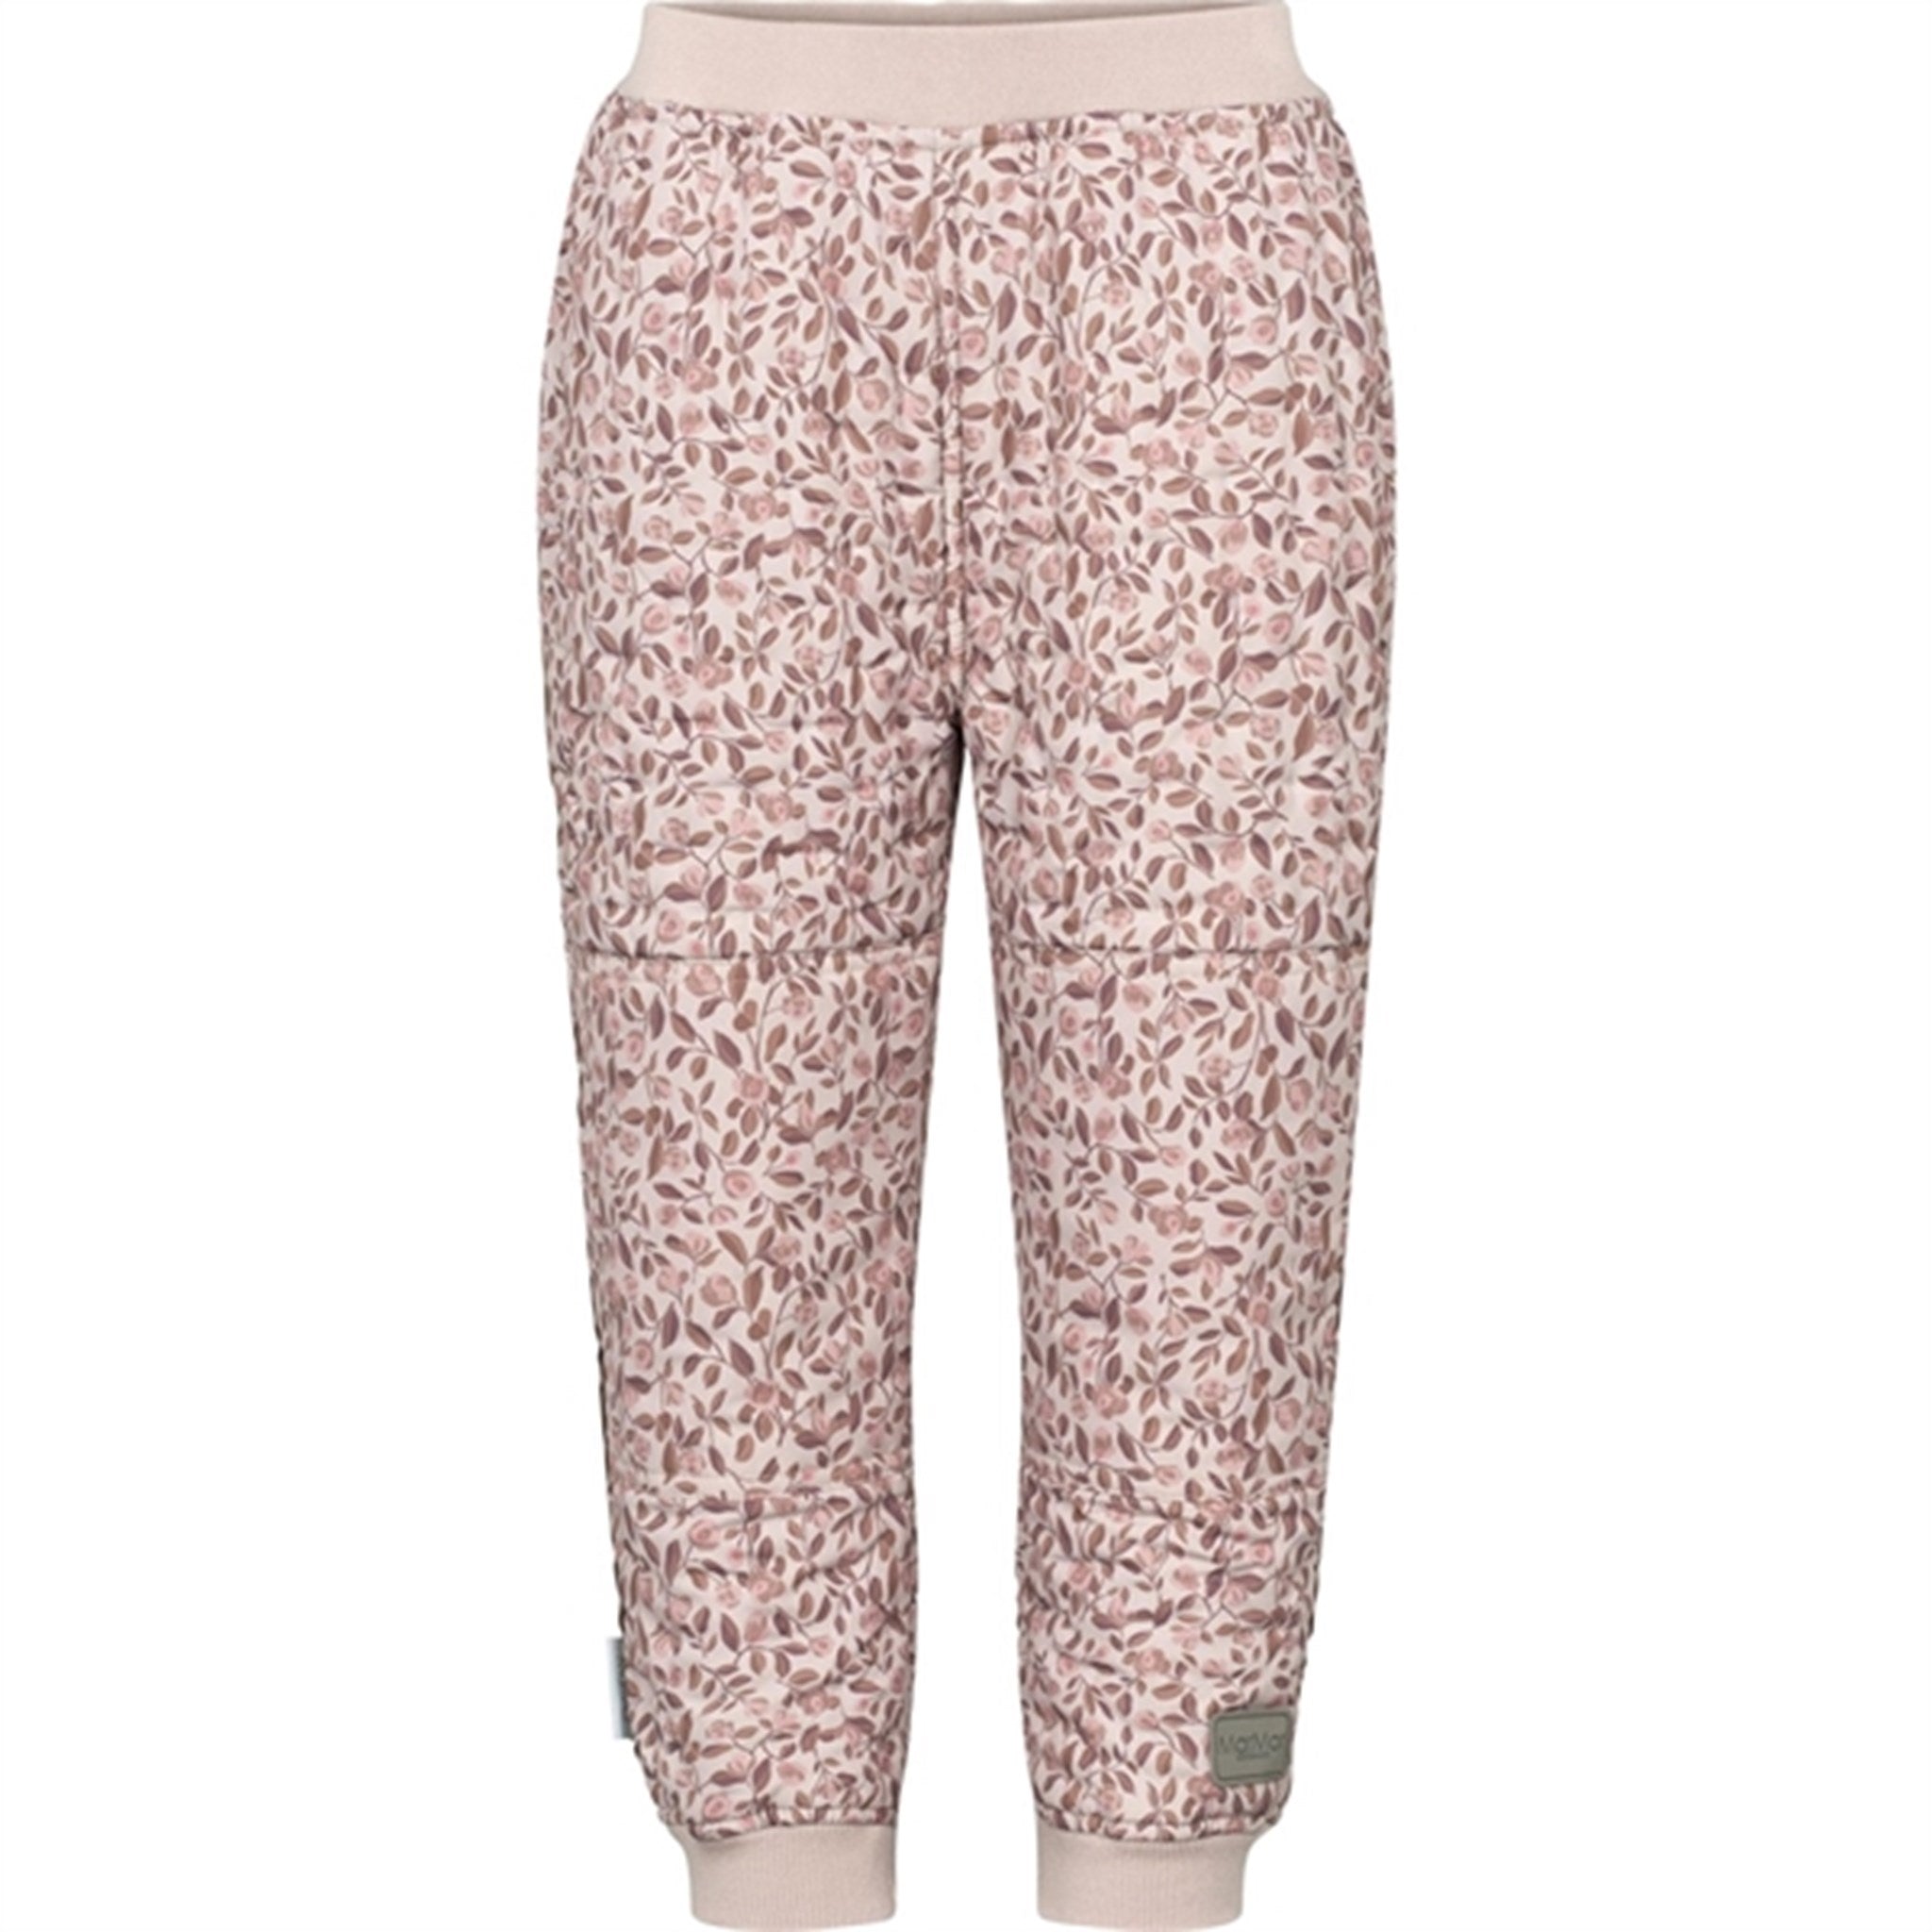 MarMar Blossom Odin Thermo Pants